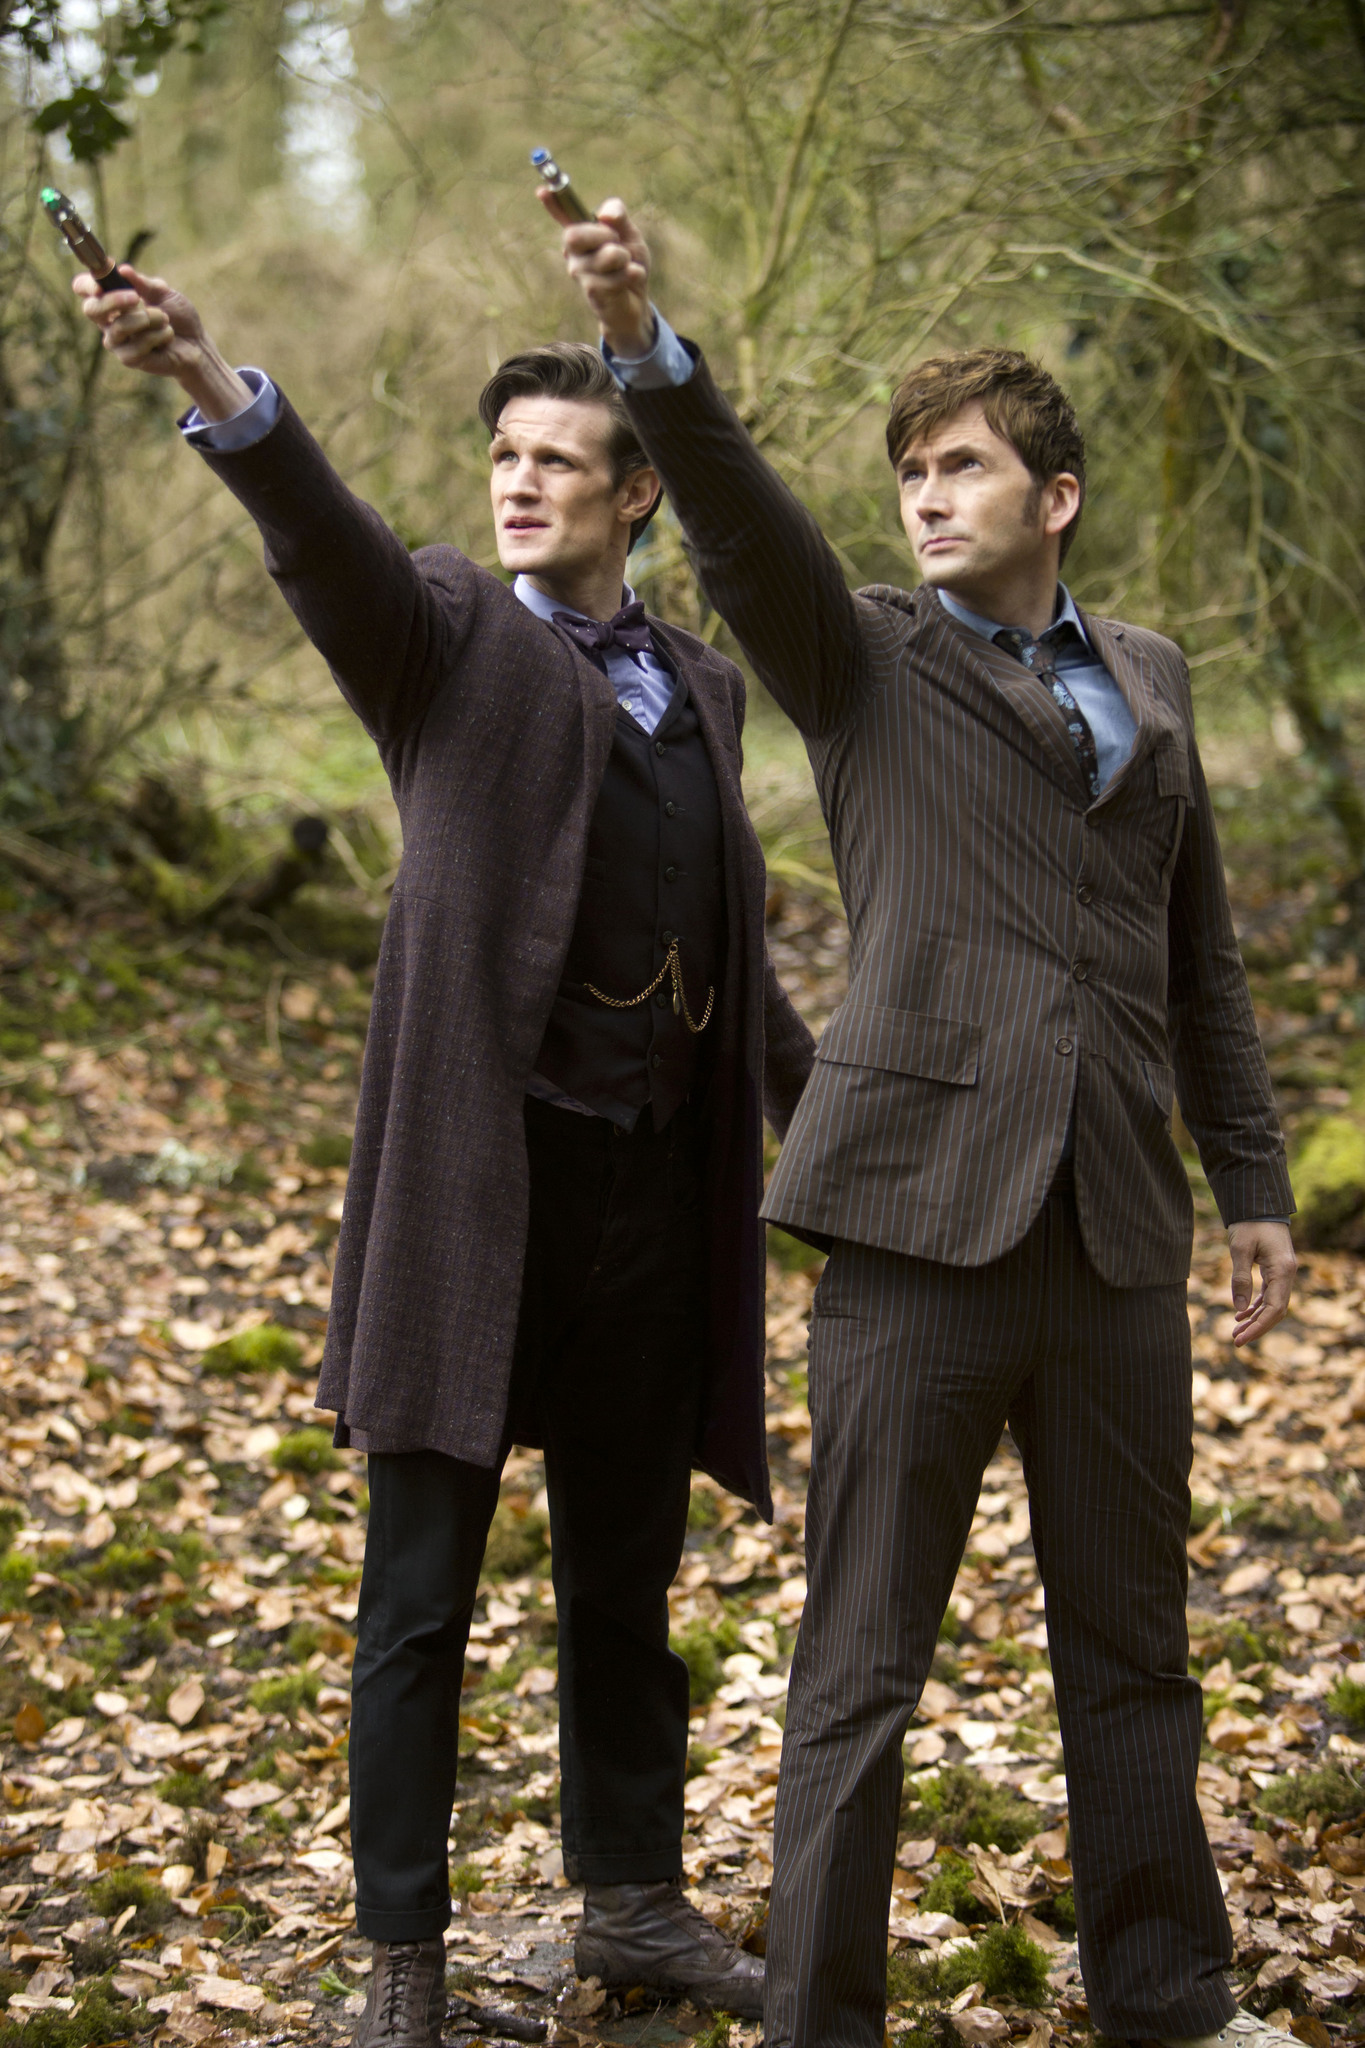 David Tennant and Matt Smith in The Day of the Doctor (2013)